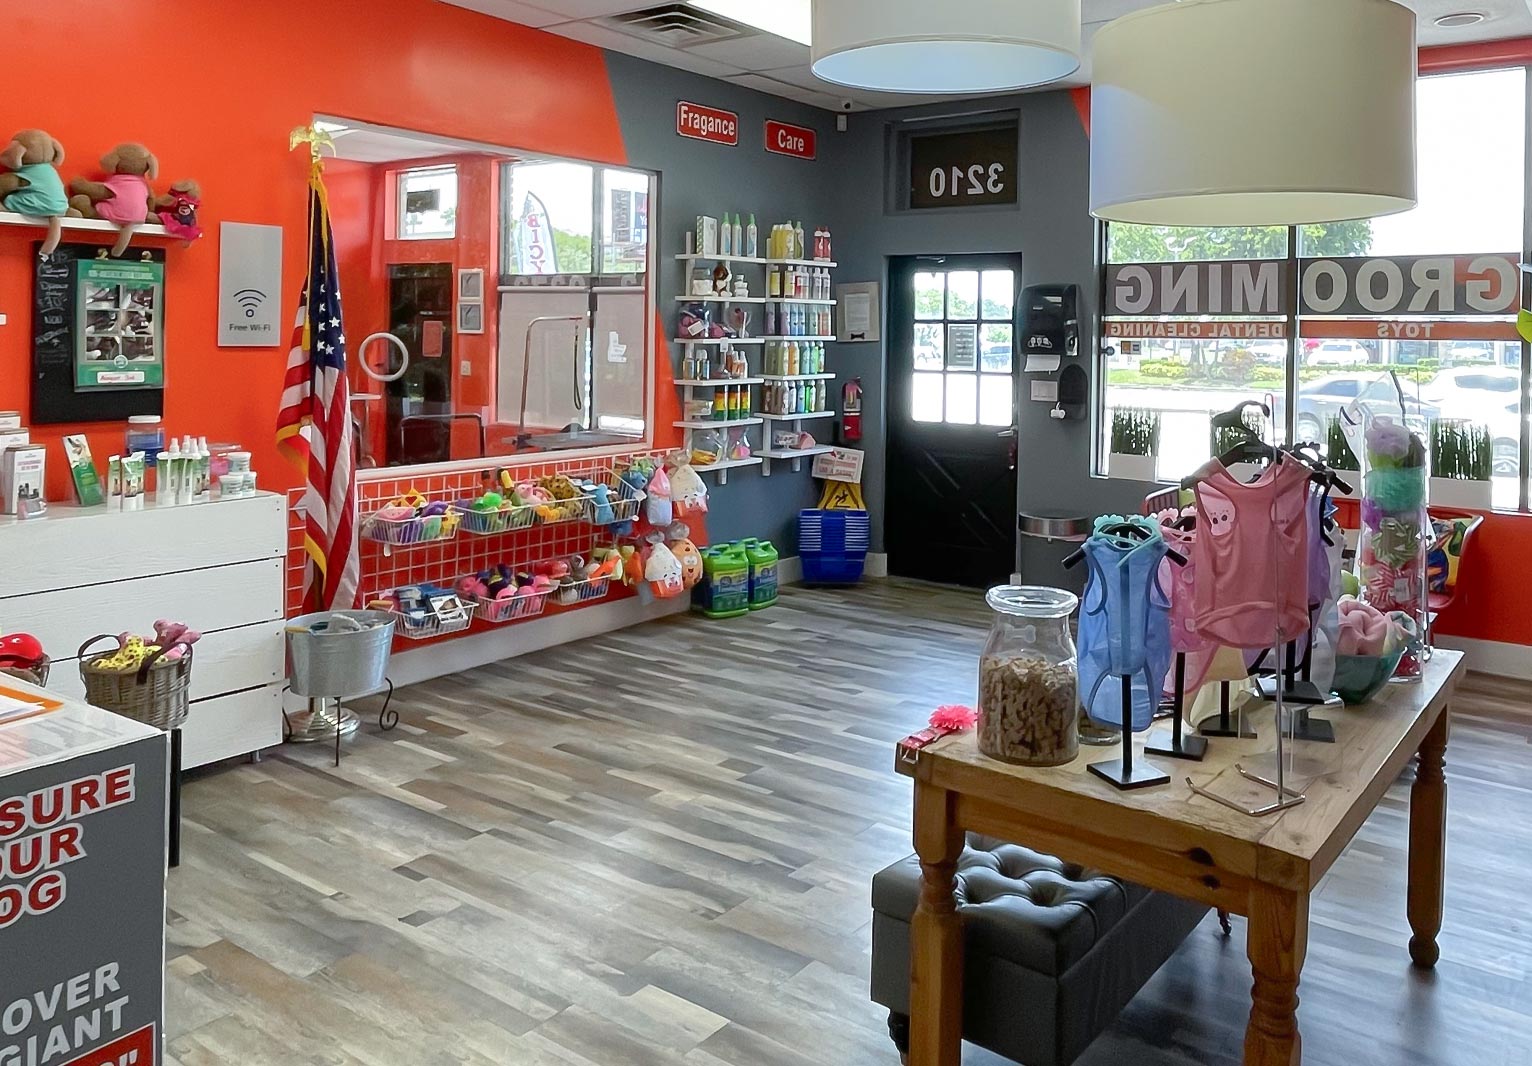 Tail Waggers Pet grooming Facility in Hollywood, Florida